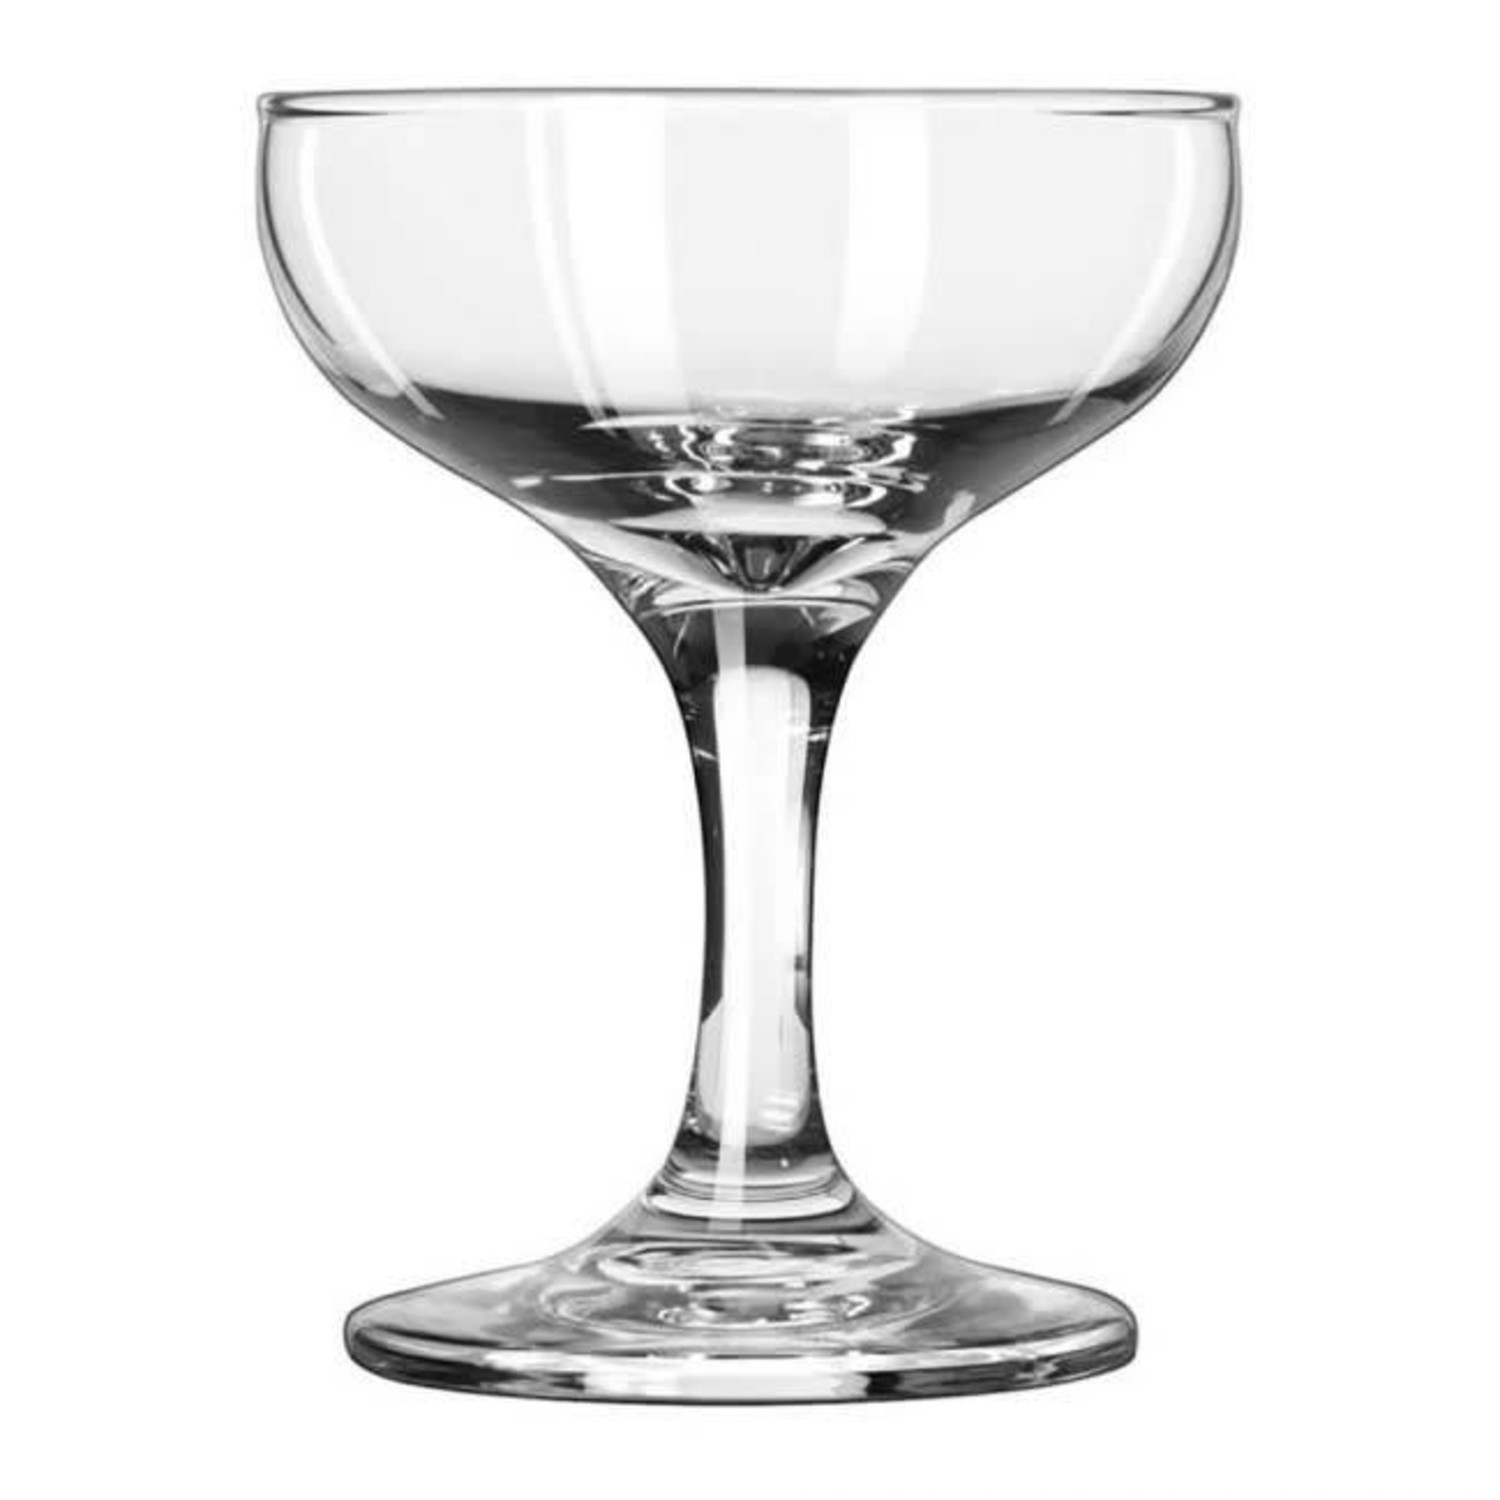 Coupe Cocktail Glass, 5.5 oz. - The Boston Shaker